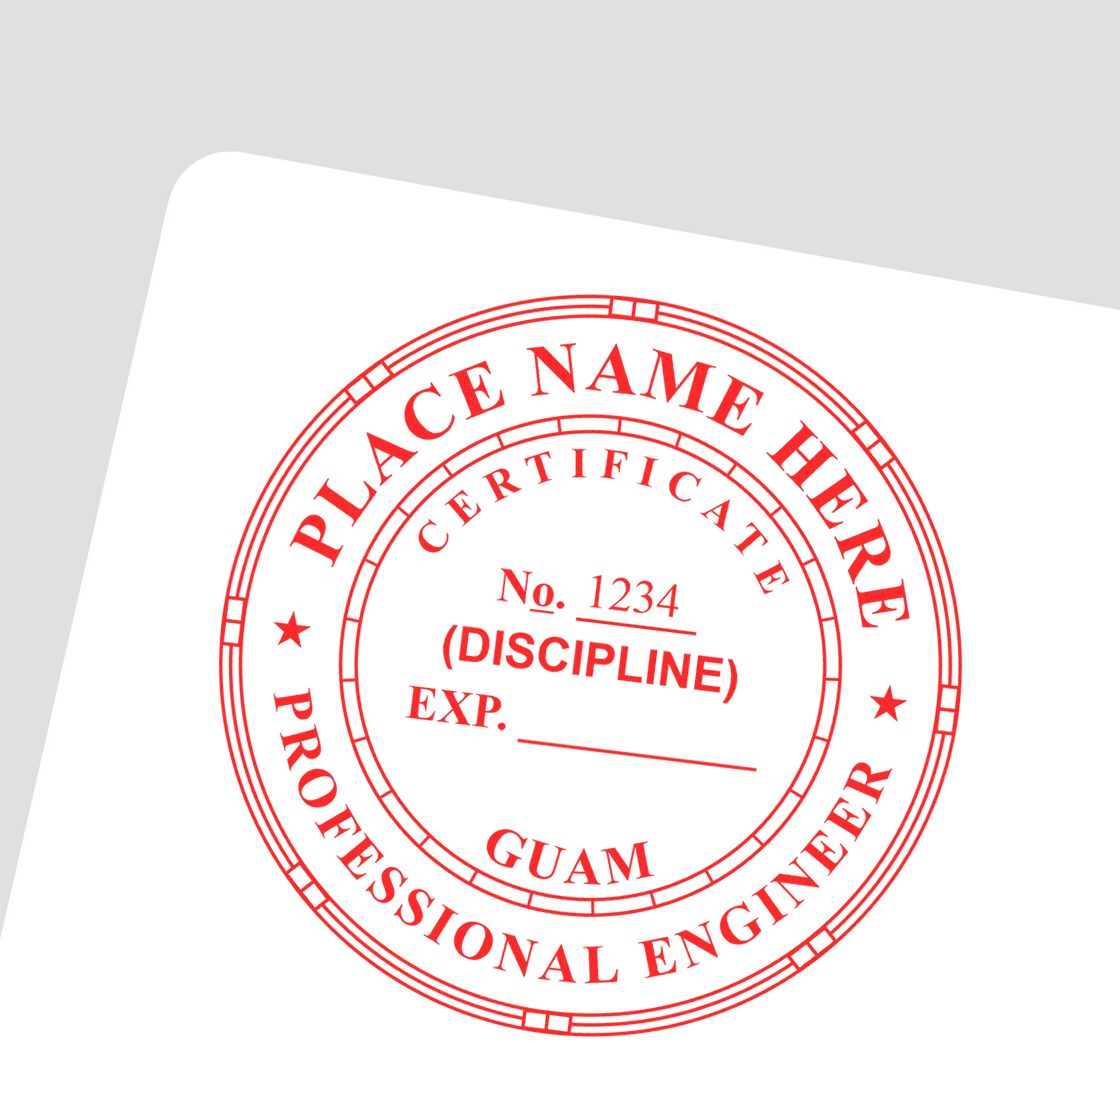 A photograph of the Slim Pre-Inked Guam Professional Engineer Seal Stamp stamp impression reveals a vivid, professional image of the on paper.